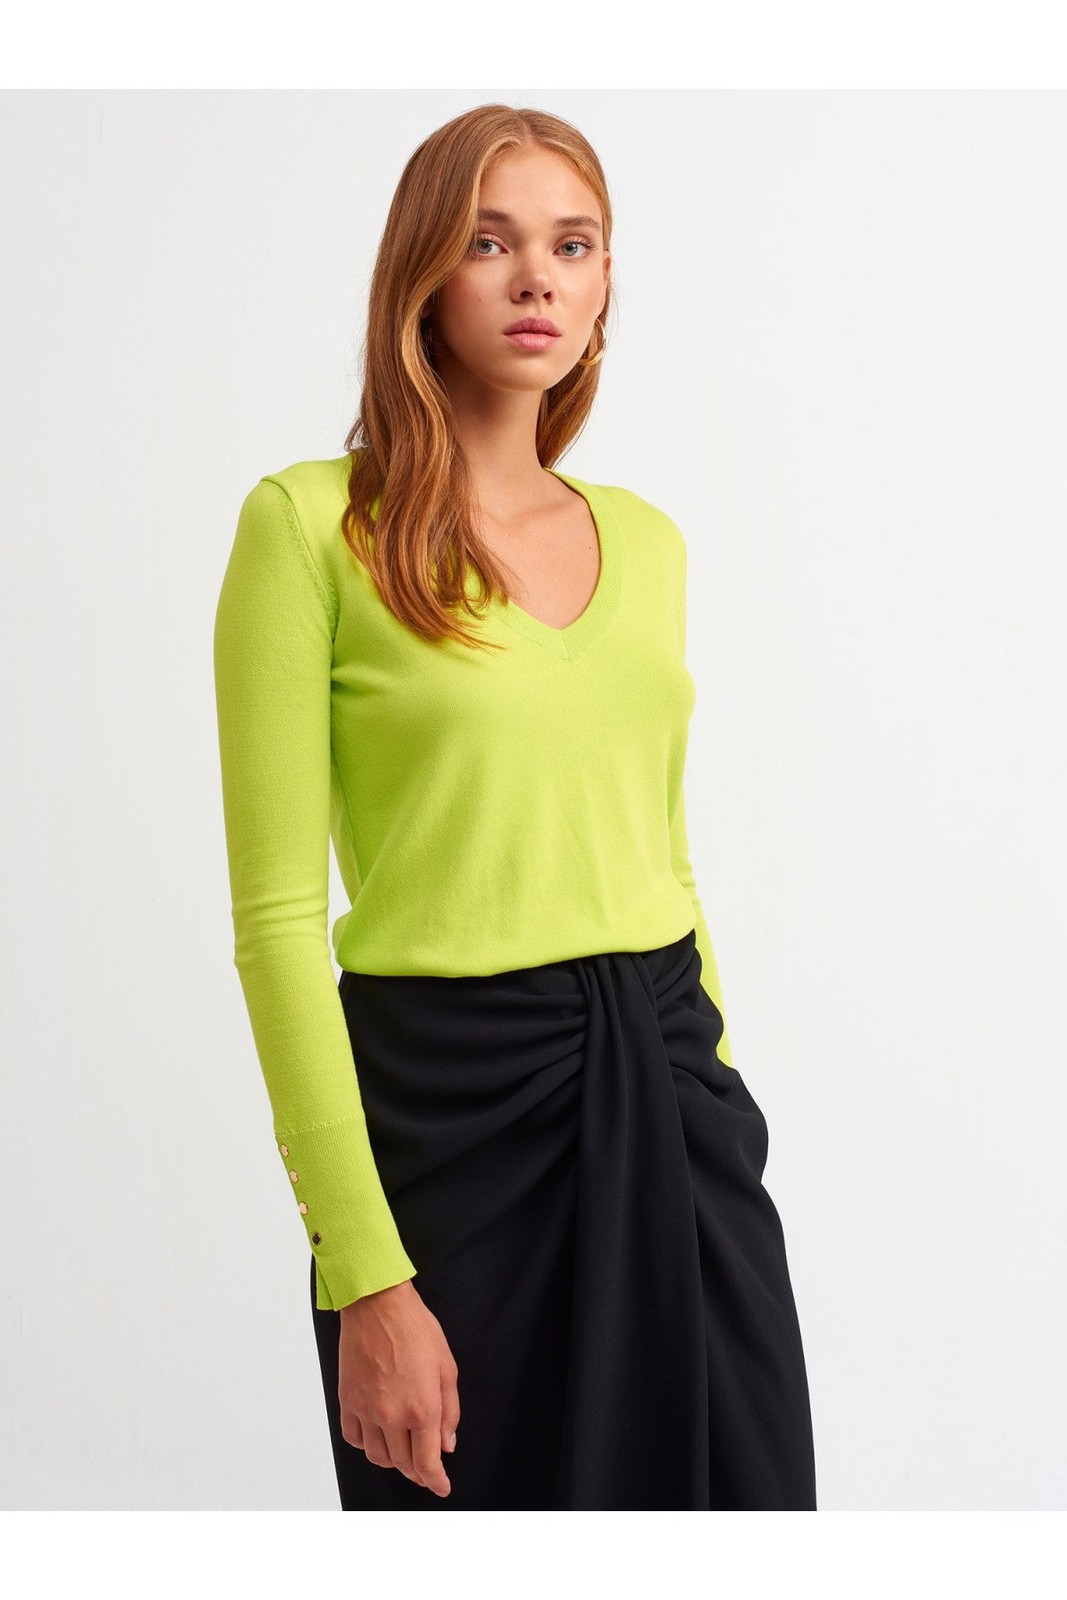 Dilvin 2443 V-Neck Arm Cuff Dropped Sweater-lime